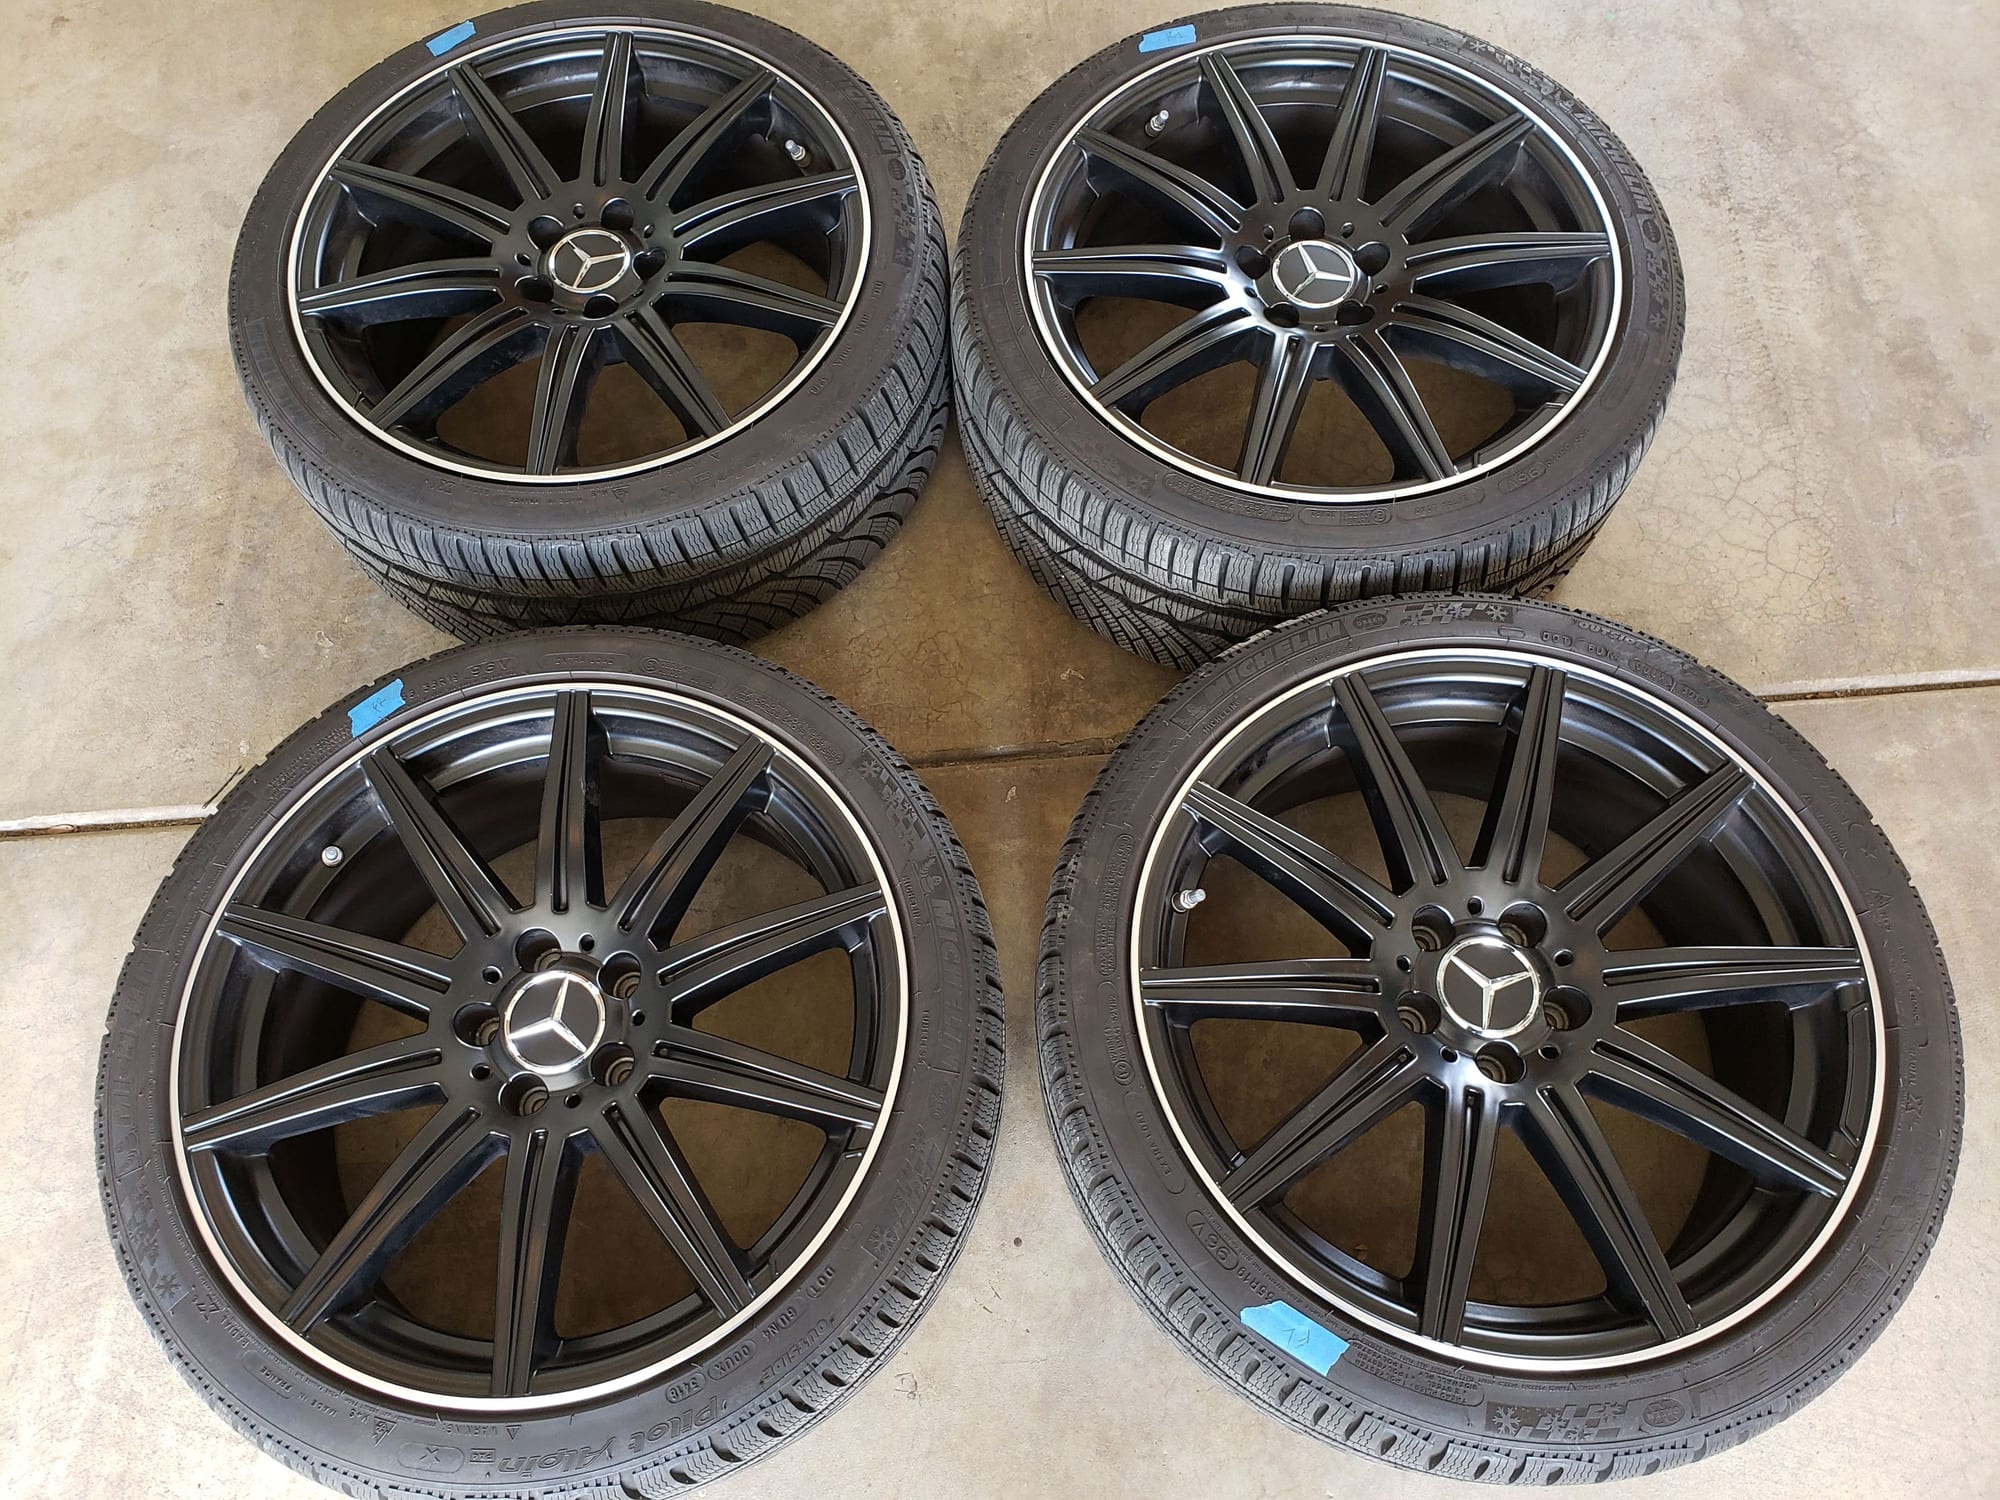 Wheels and Tires/Axles - W212 Michelin Alpin PA4 with replica wheels 19x8.5 *Pick up only* - Used - 2014 to 2016 Mercedes-Benz E63 AMG S - Chicago, IL 60074, United States